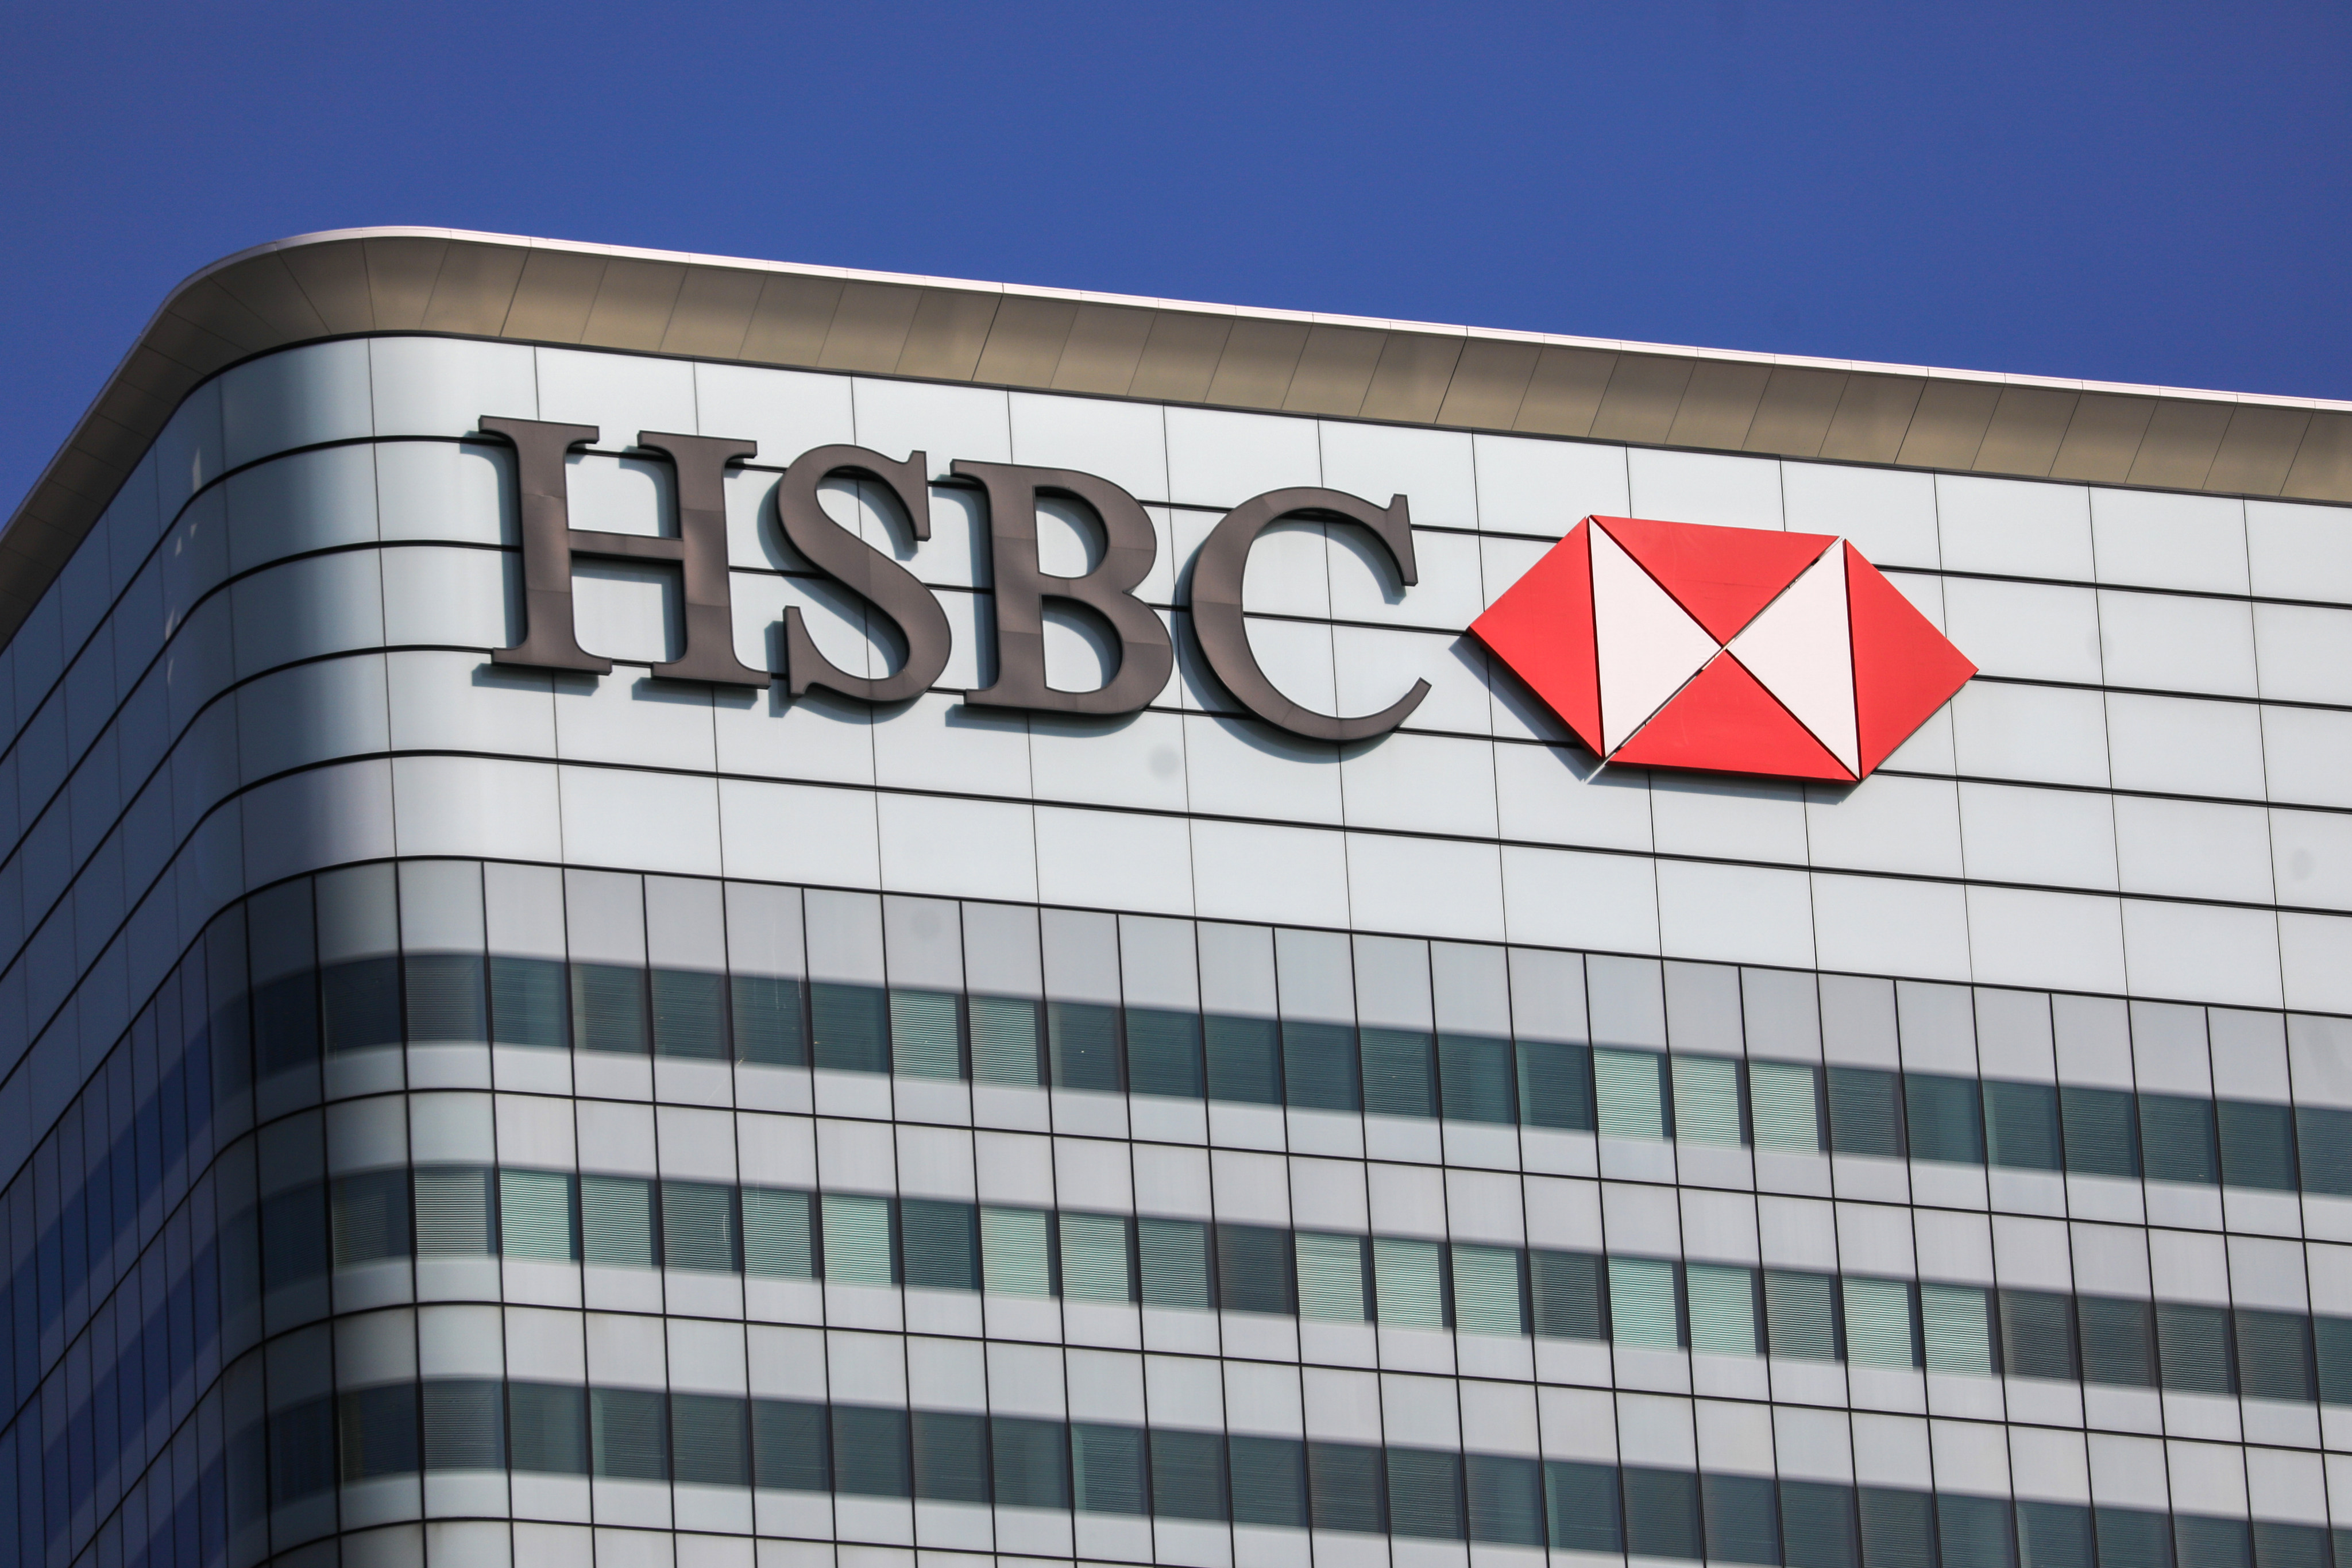 HSBC’s global headquarters has been located at 8 Canada Square, a 45-storey high-rise in Canary Wharf, since 2002. Photo: Bloomberg